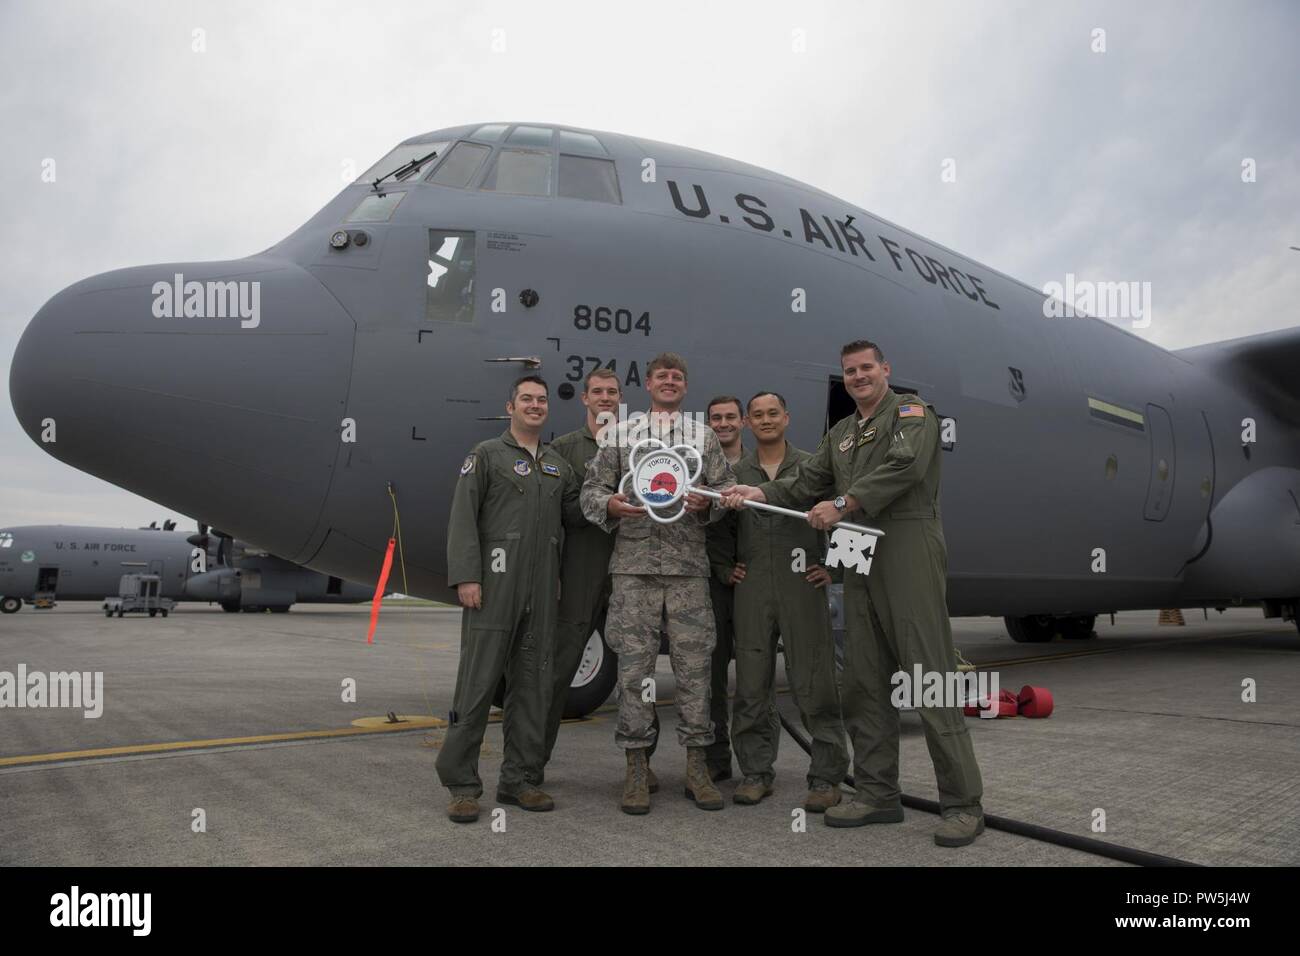 Members of the C-130J delivery team pose for a photo in front of a C-130J Super Hercules at Yokota Air Base, Japan, Sept. 20, 2107. This is the fifth C-130J delivered to Yokota and the first from Ramstein Air Base. Crewmembers from the 36th Airlift Squadron flew halfway around the world to deliver the aircraft here. Yokota serves as the primary Western Pacific airlift hub for U.S. Air Force peacetime and contingency operations. Missions include tactical airland, airdrop,aeromedical evacuation, special operations and distinguished visitor airlift. Stock Photo